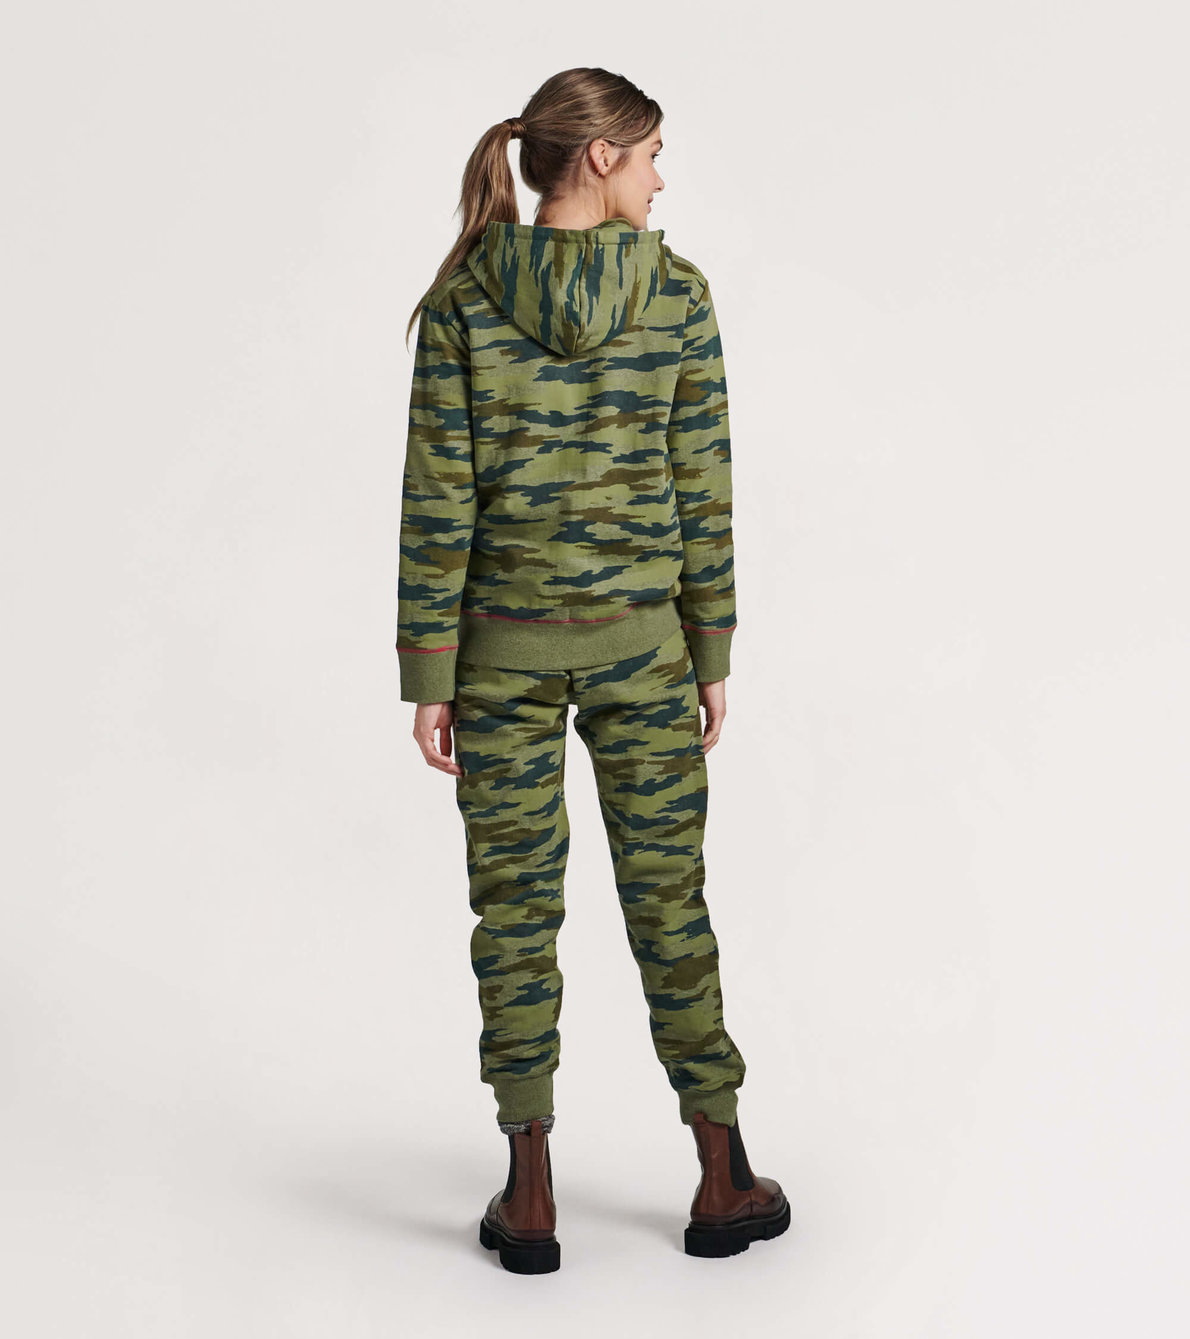 View larger image of Woodland Camo Women's Heritage Separates with Full Zip Hoodie